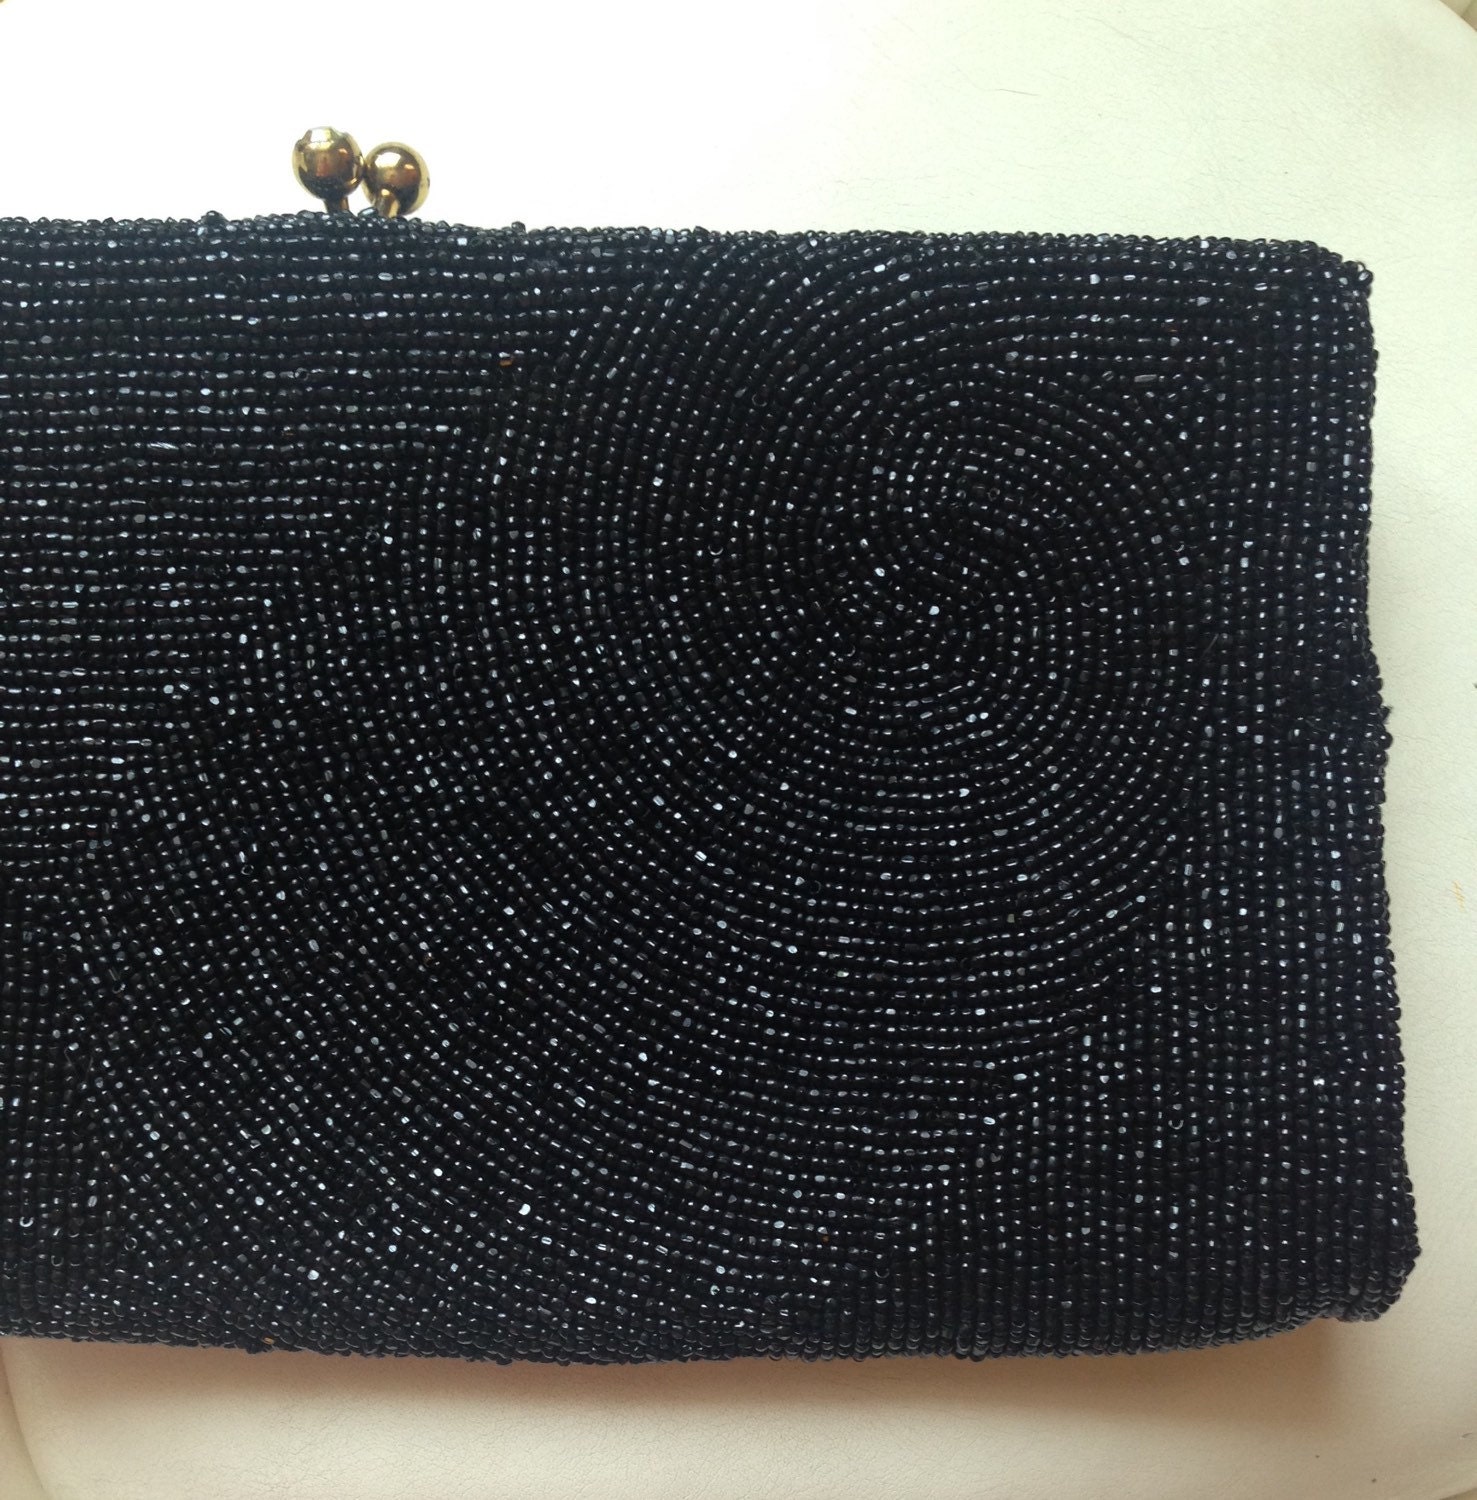 Vintage Walborg Black Beaded Clutch Evening Bag Purse with